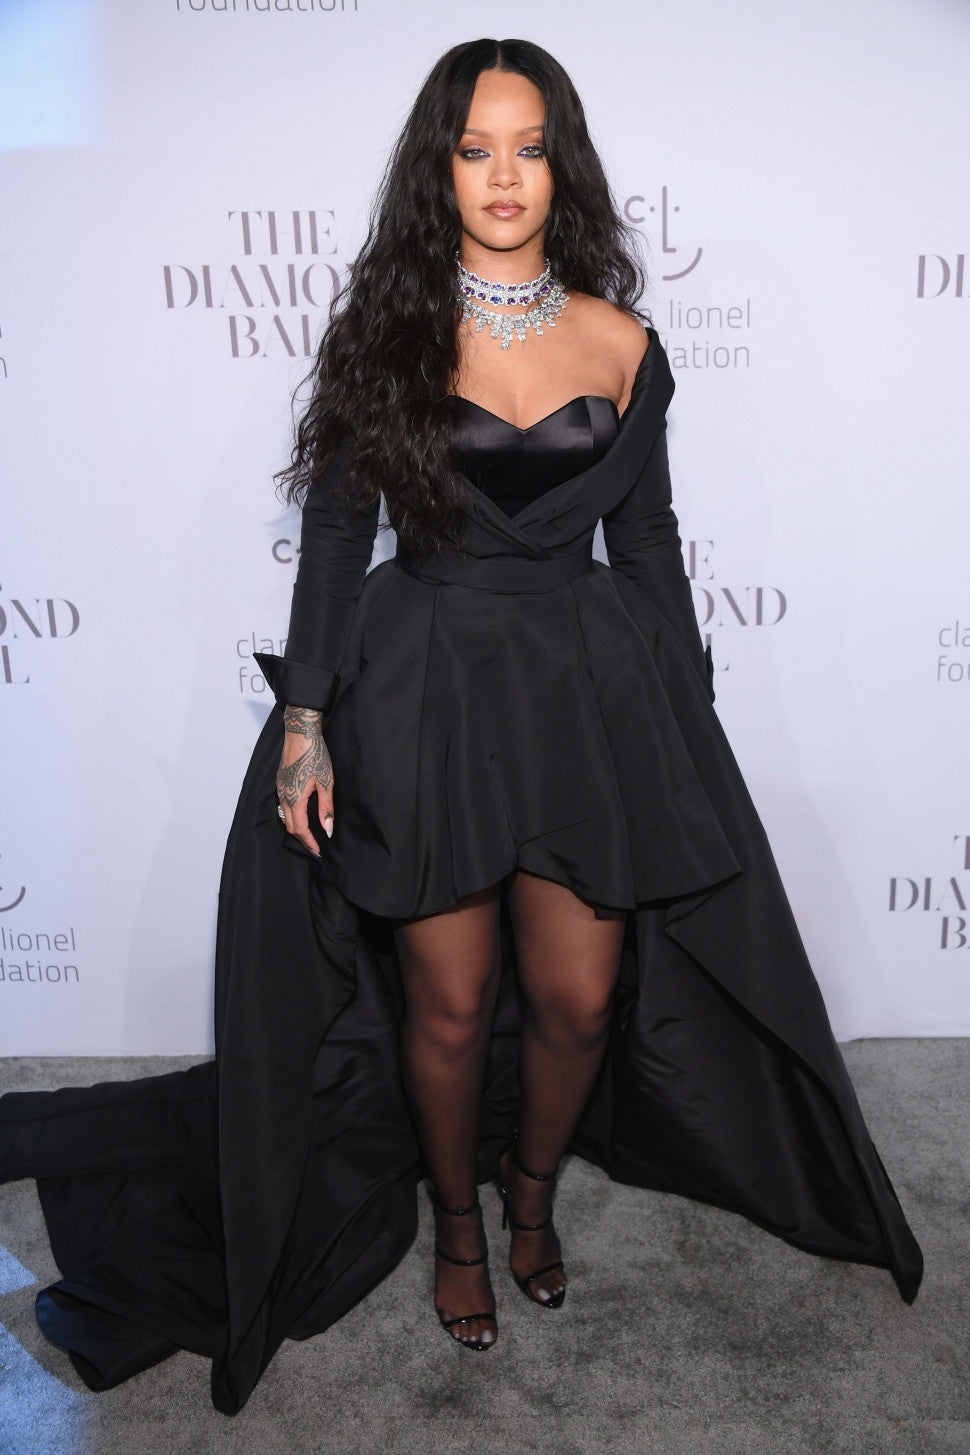 Rihanna at the 3rd Annual Diamond Ball in NYC